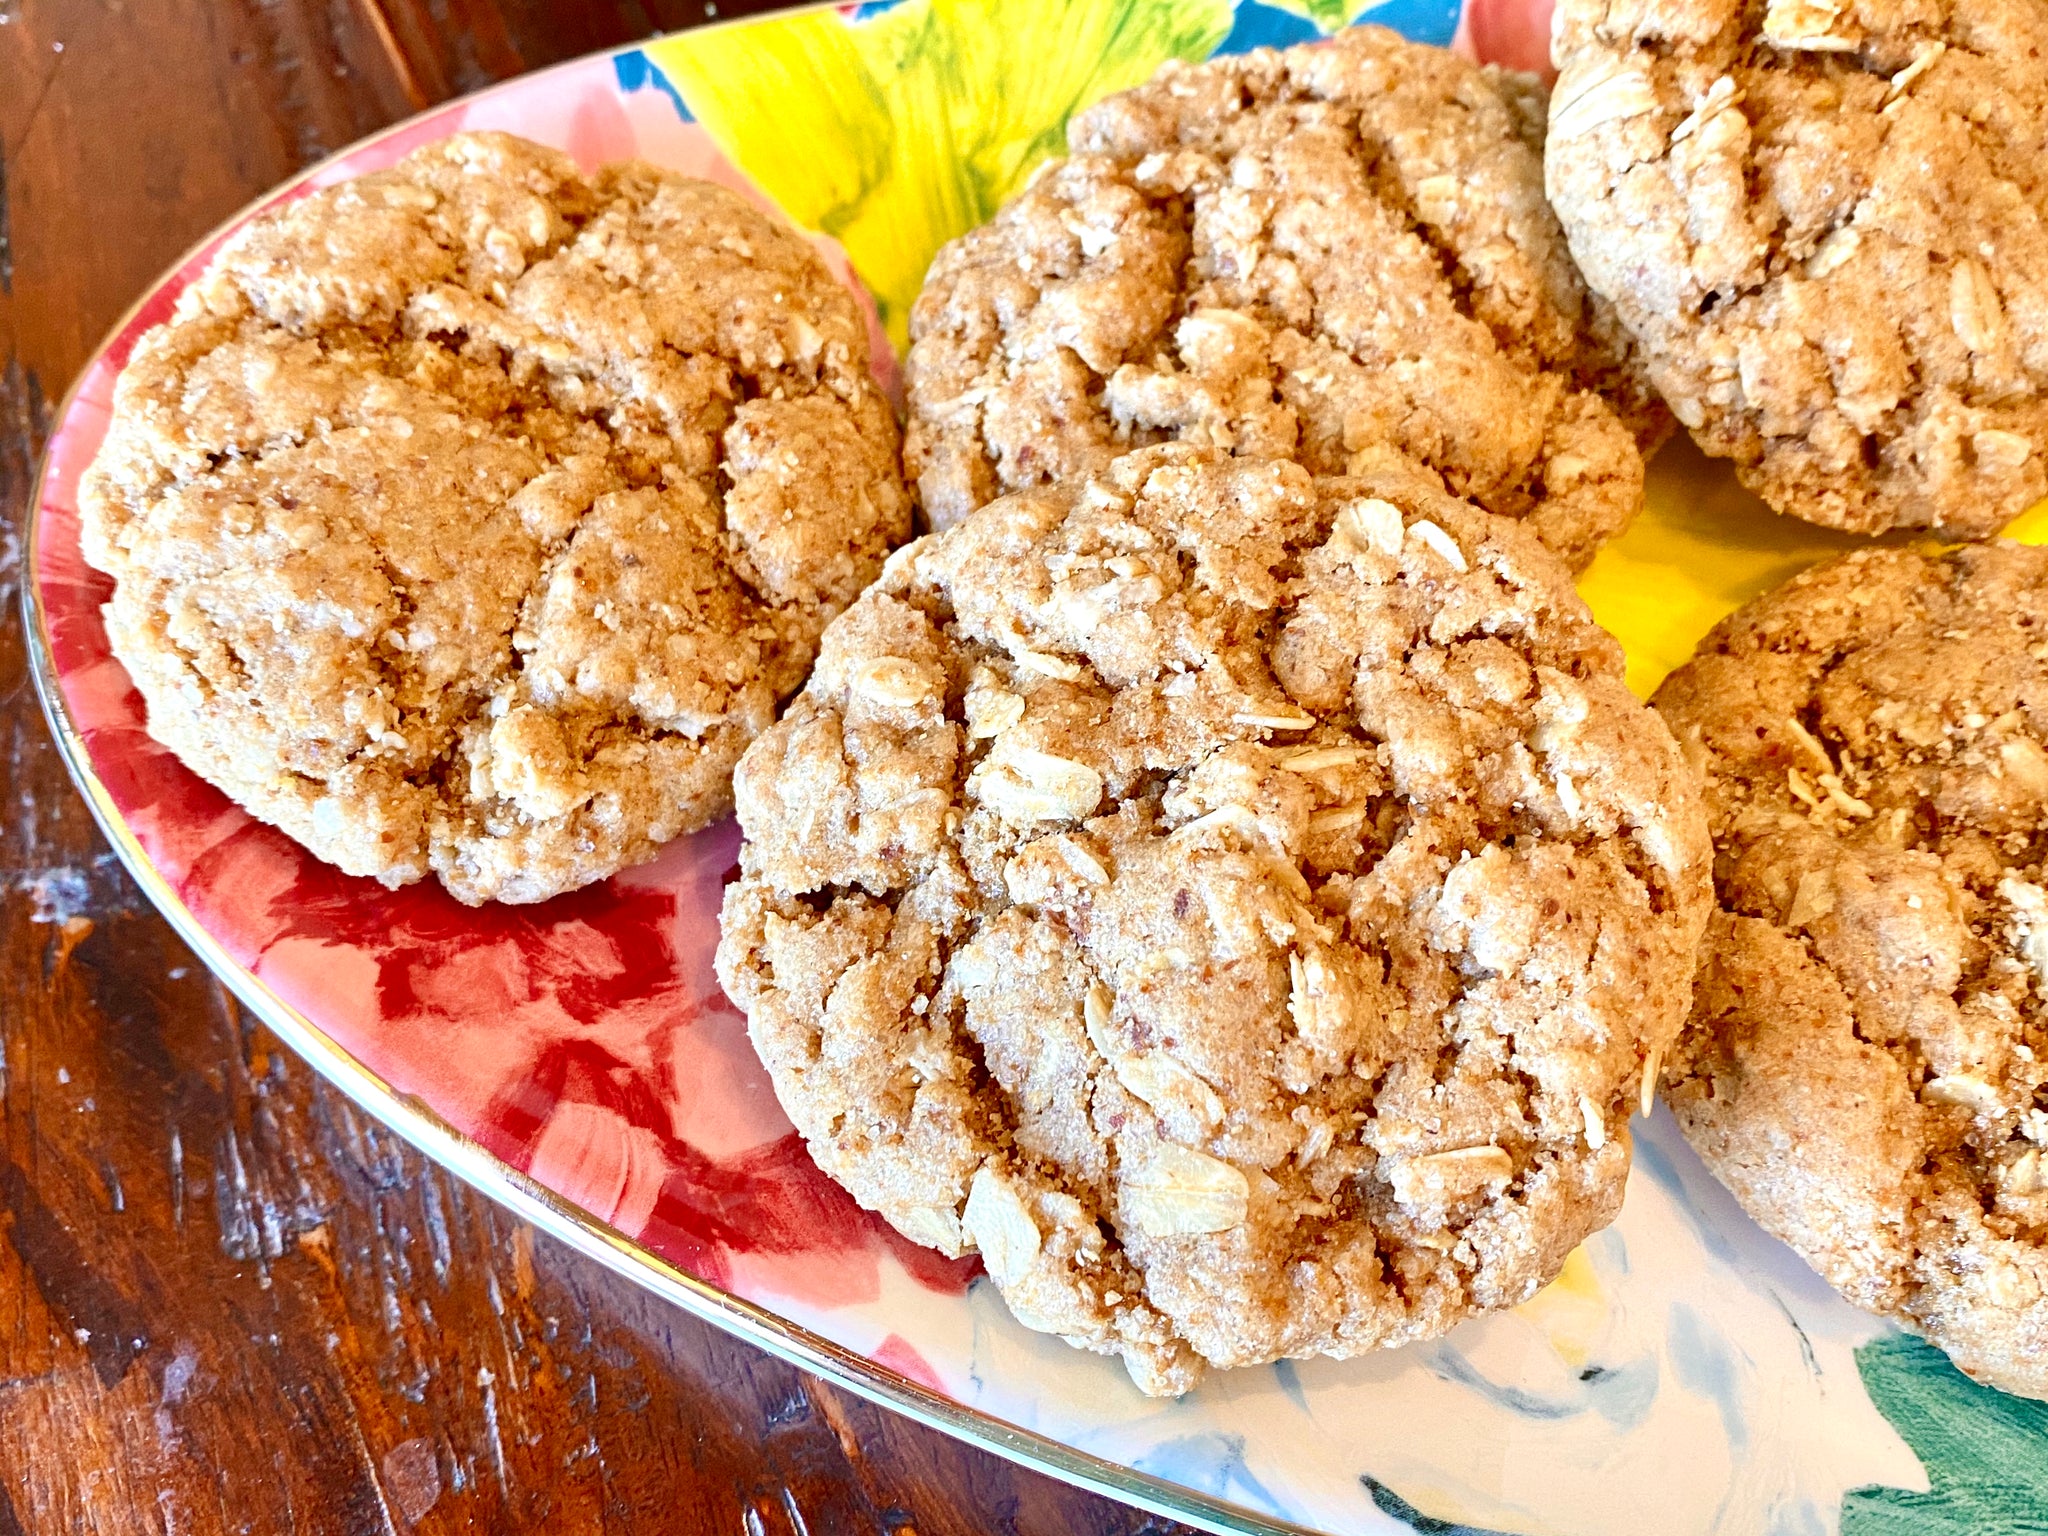 Three Cinnamon Oatmeal Cookie Kits (40% off! Discount applied at checkout)